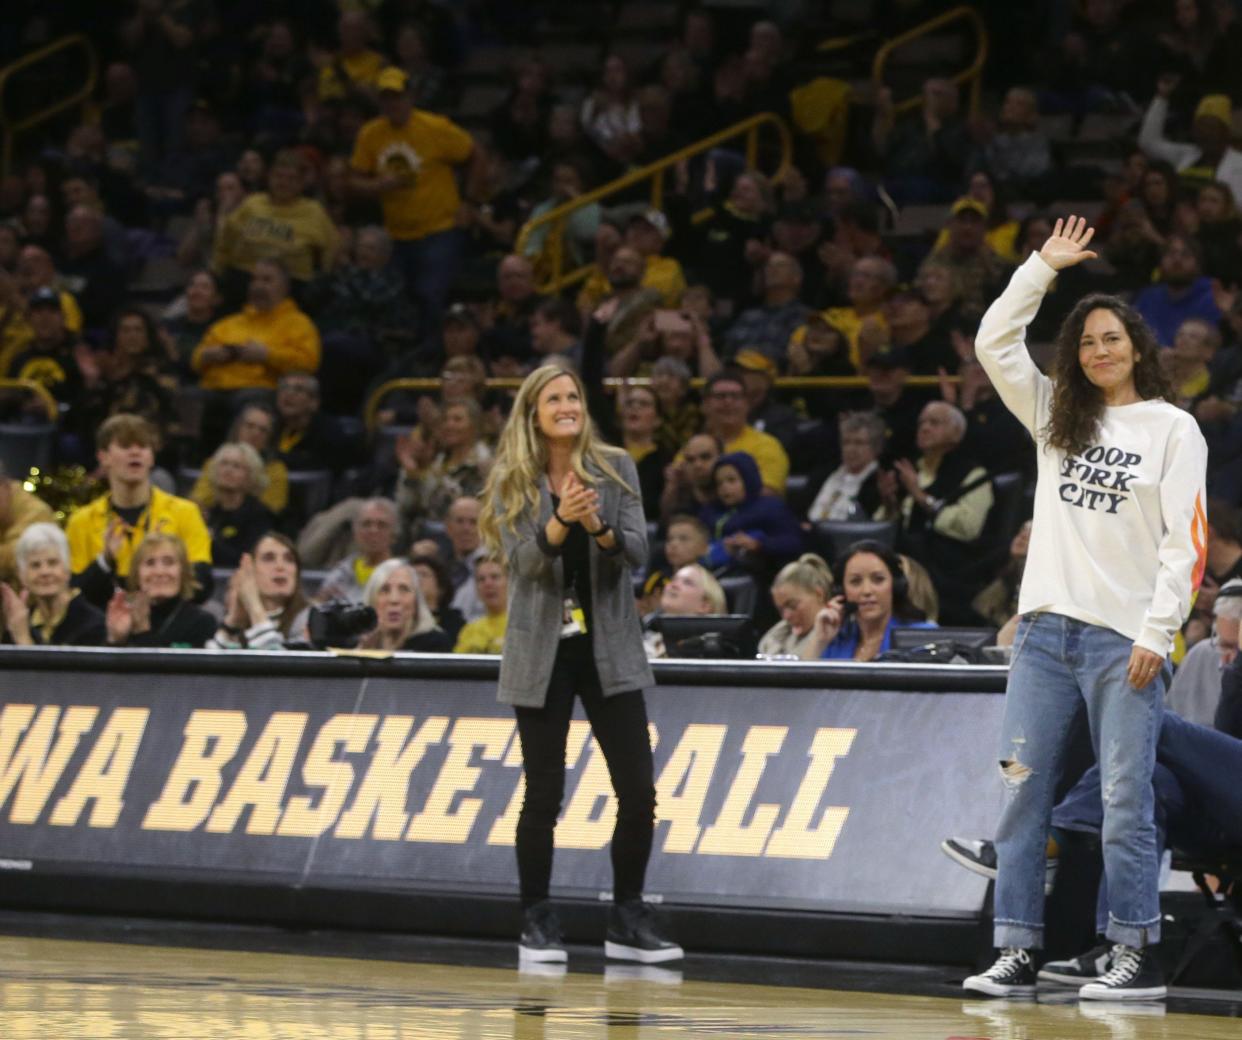 Sue Bird waves to the crowd during the Iowa Women’s Basketball game against Bowling Green Saturday, Dec. 2, 2023 at Carver-Hawkeye Arena in Iowa City, Iowa.